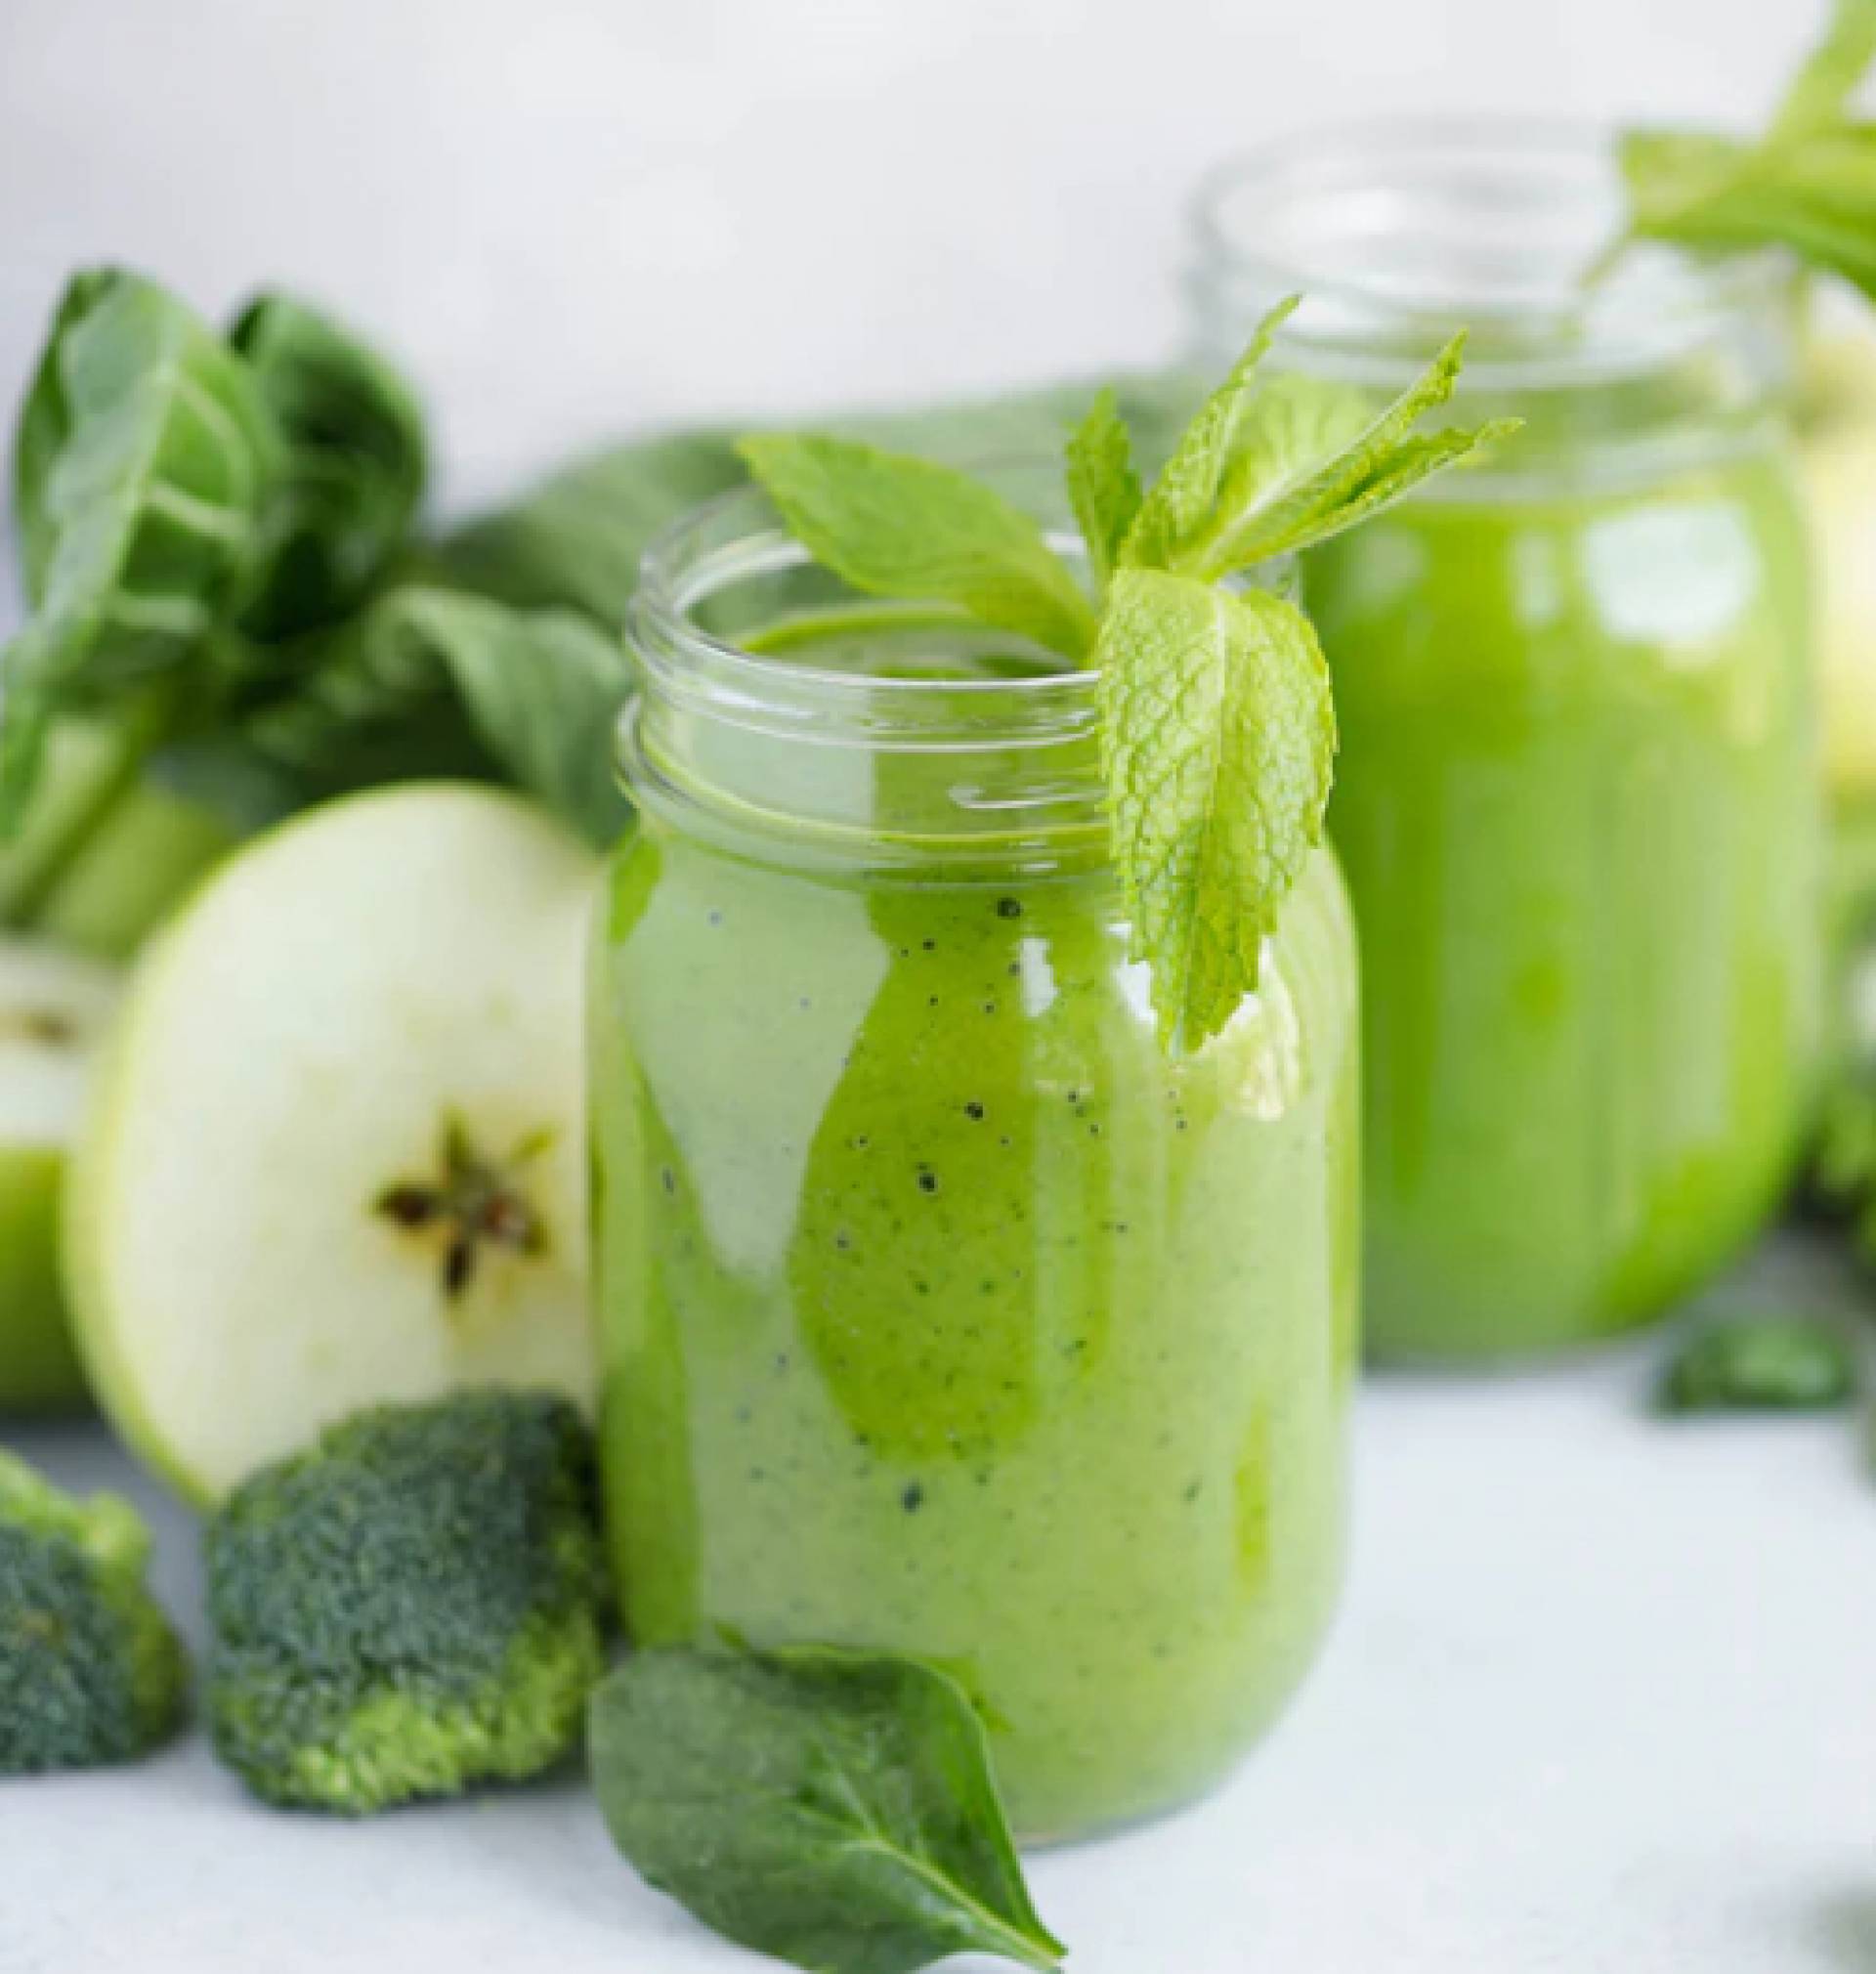 The Lime Mojito Smoothie